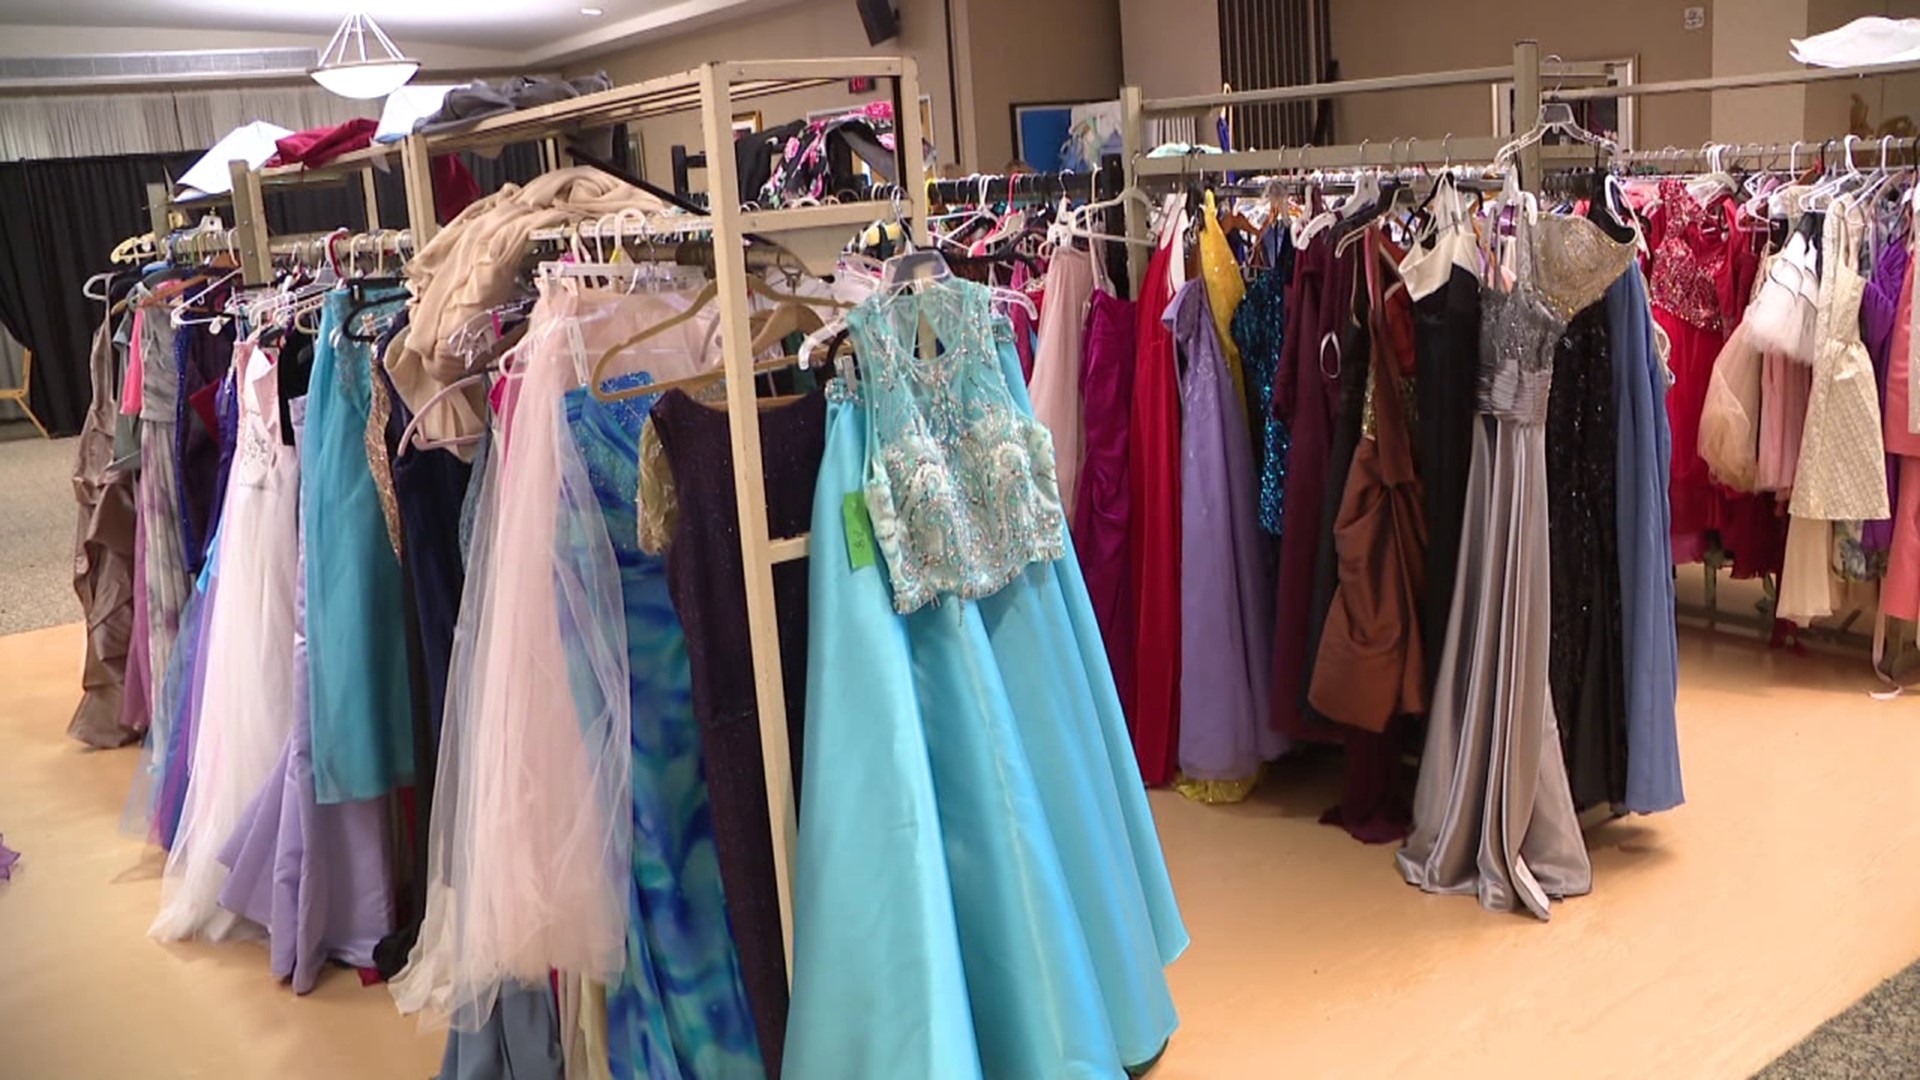 Damsel in a Dress helped giveaway 200 dresses in Wilkes-Barre on Sunday.